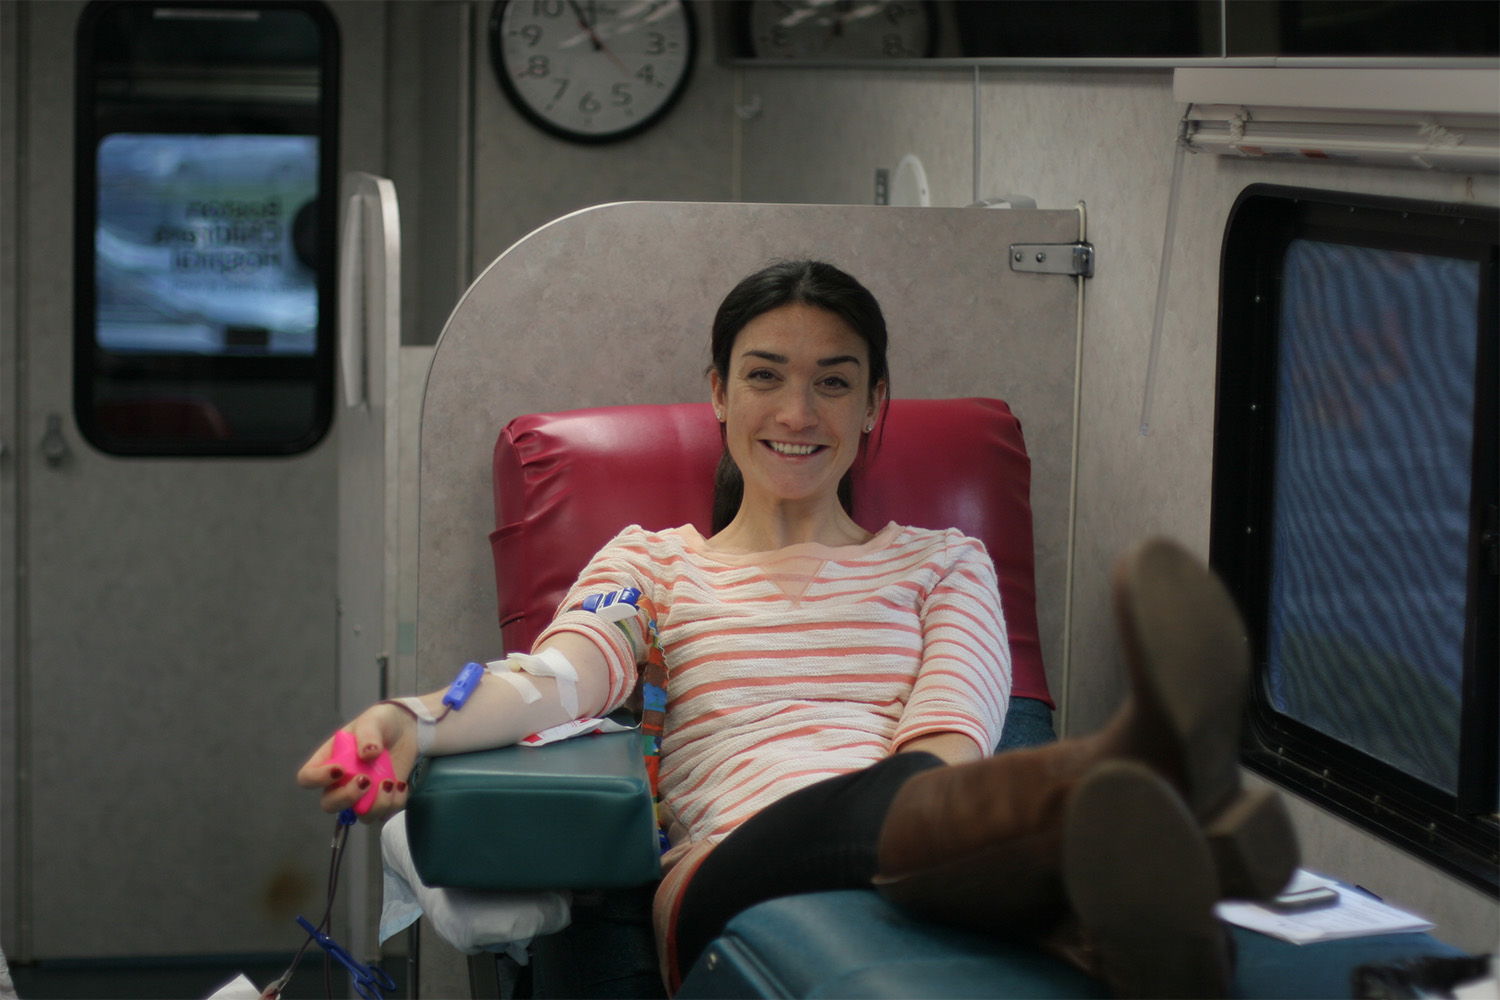 Katie our blood drive organizer prepares for her turn to donate.